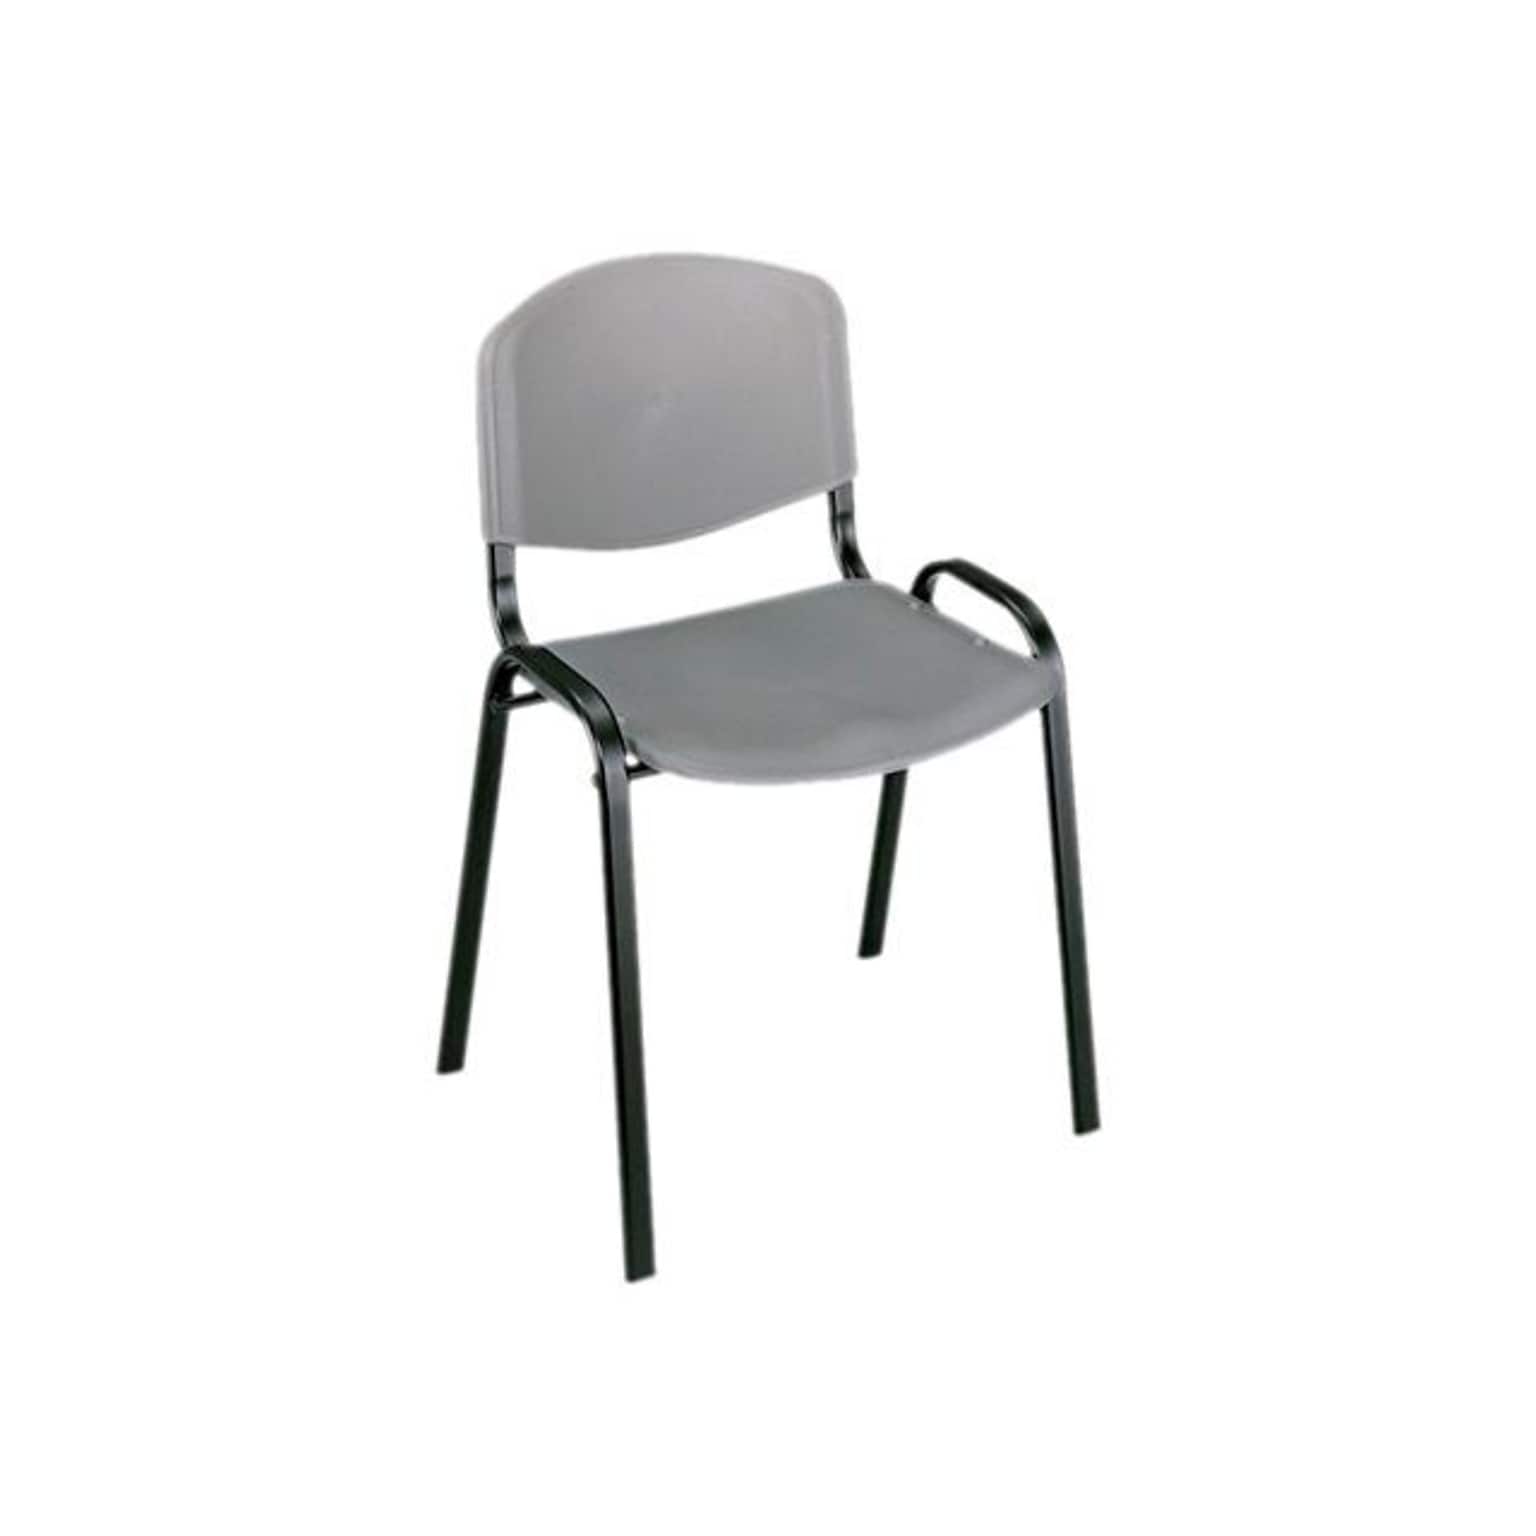 Safco Stack Polypropylene Stacking Chair, Charcoal (4185CH)